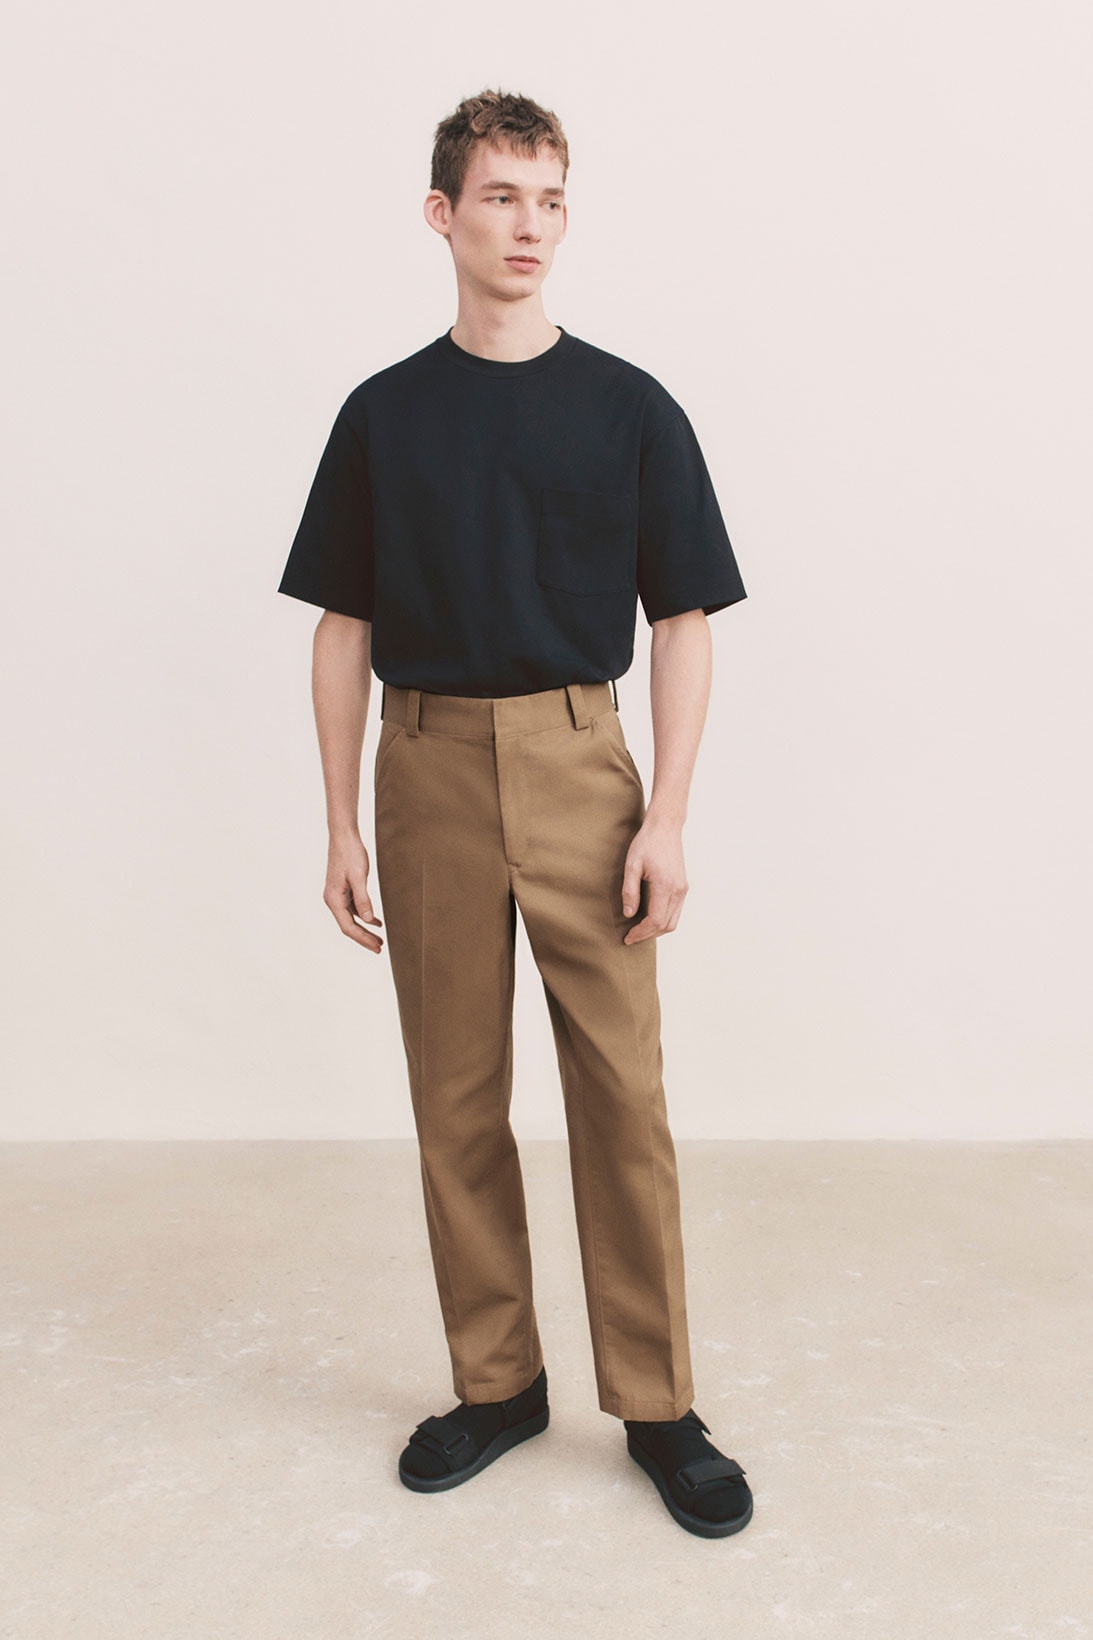 uniqlo u spring summer collection black tee t shirt pants shoes